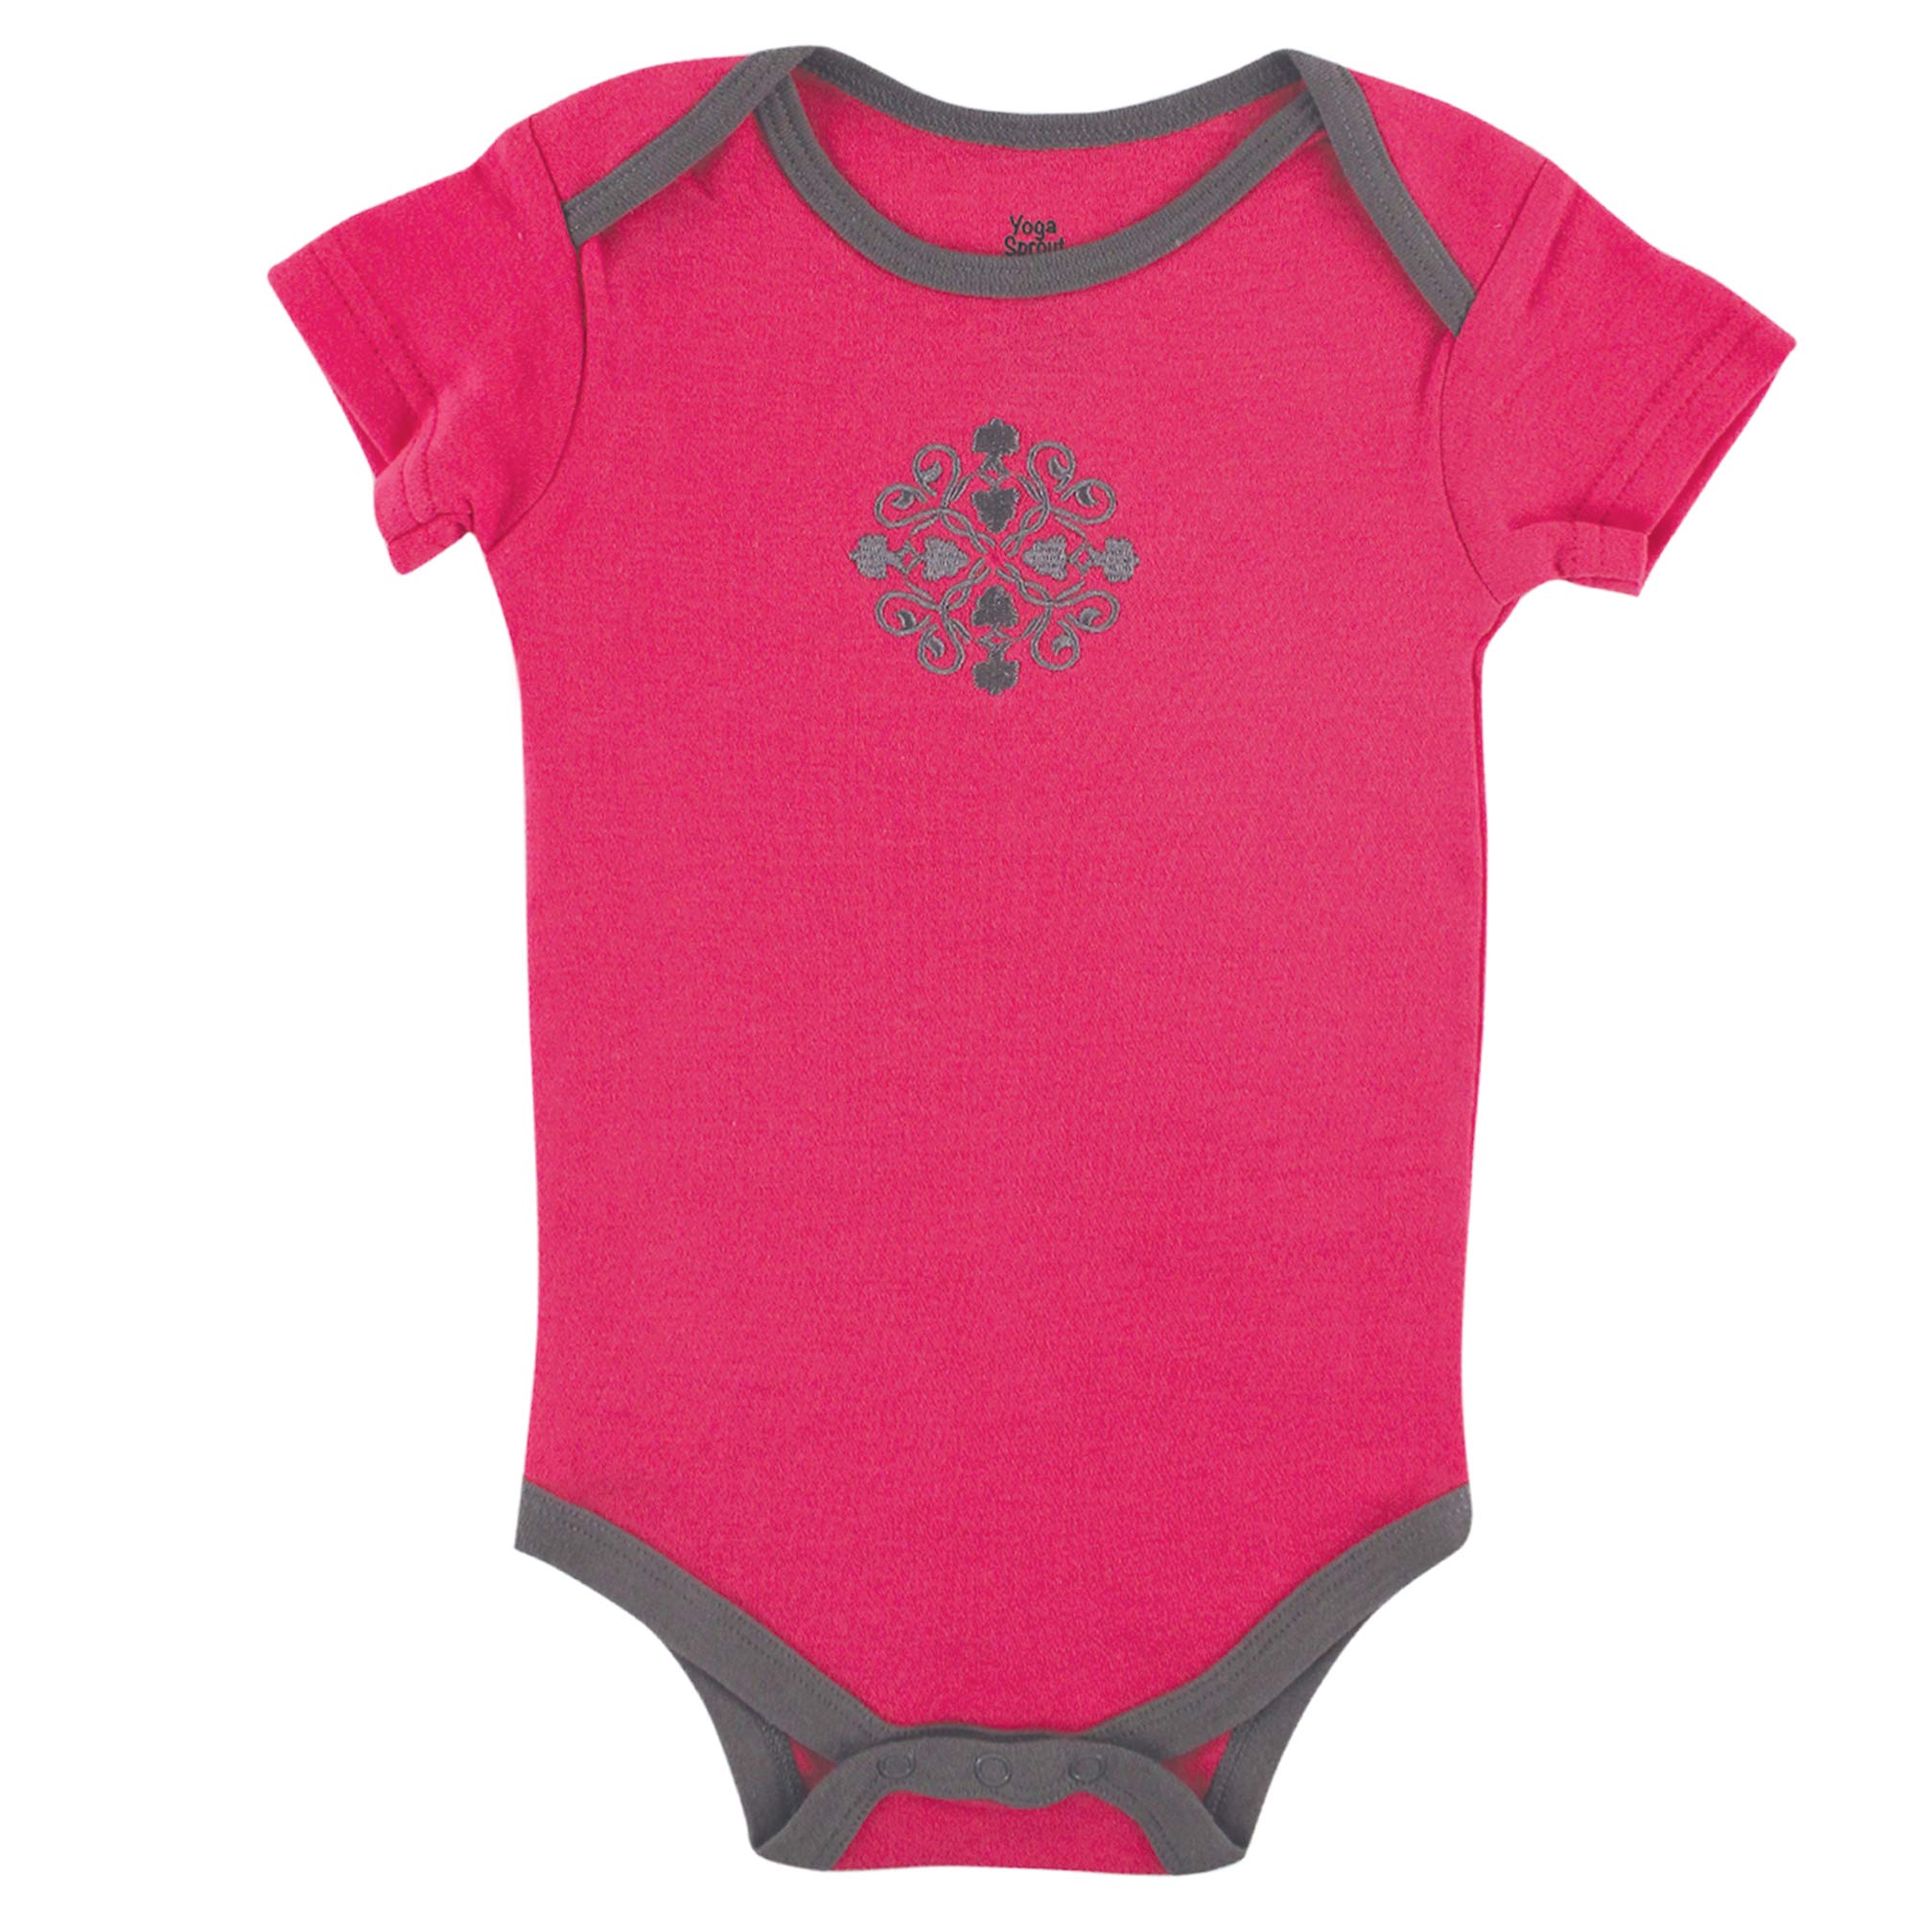 Yoga Sprout Unisex Baby Cotton Hoodie, Bodysuit or Tee Top, and Pant